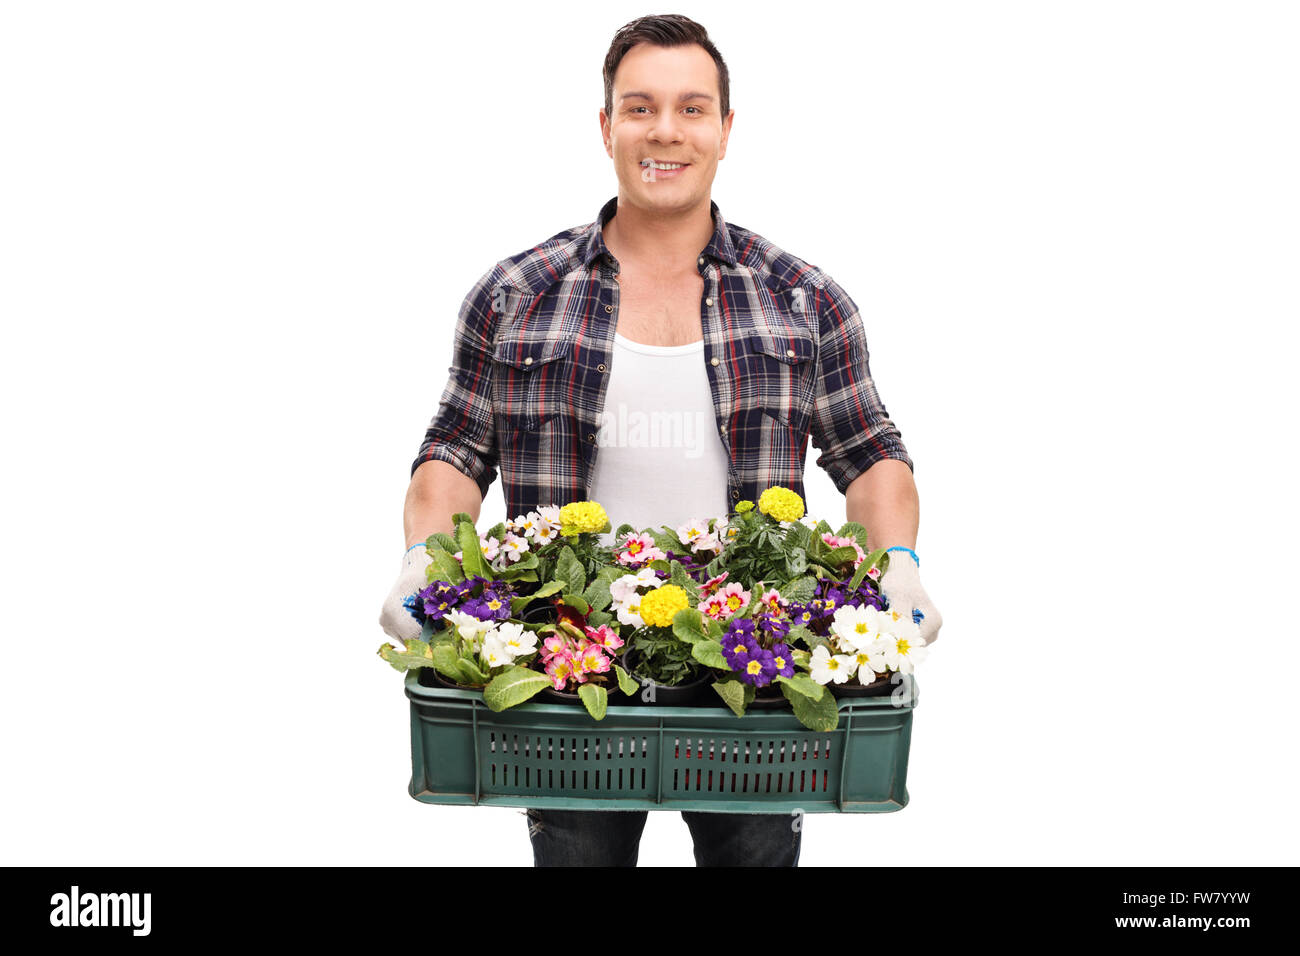 Young cheerful gardener holding a plastic crate full of beautiful flowers isolated on white background Stock Photo